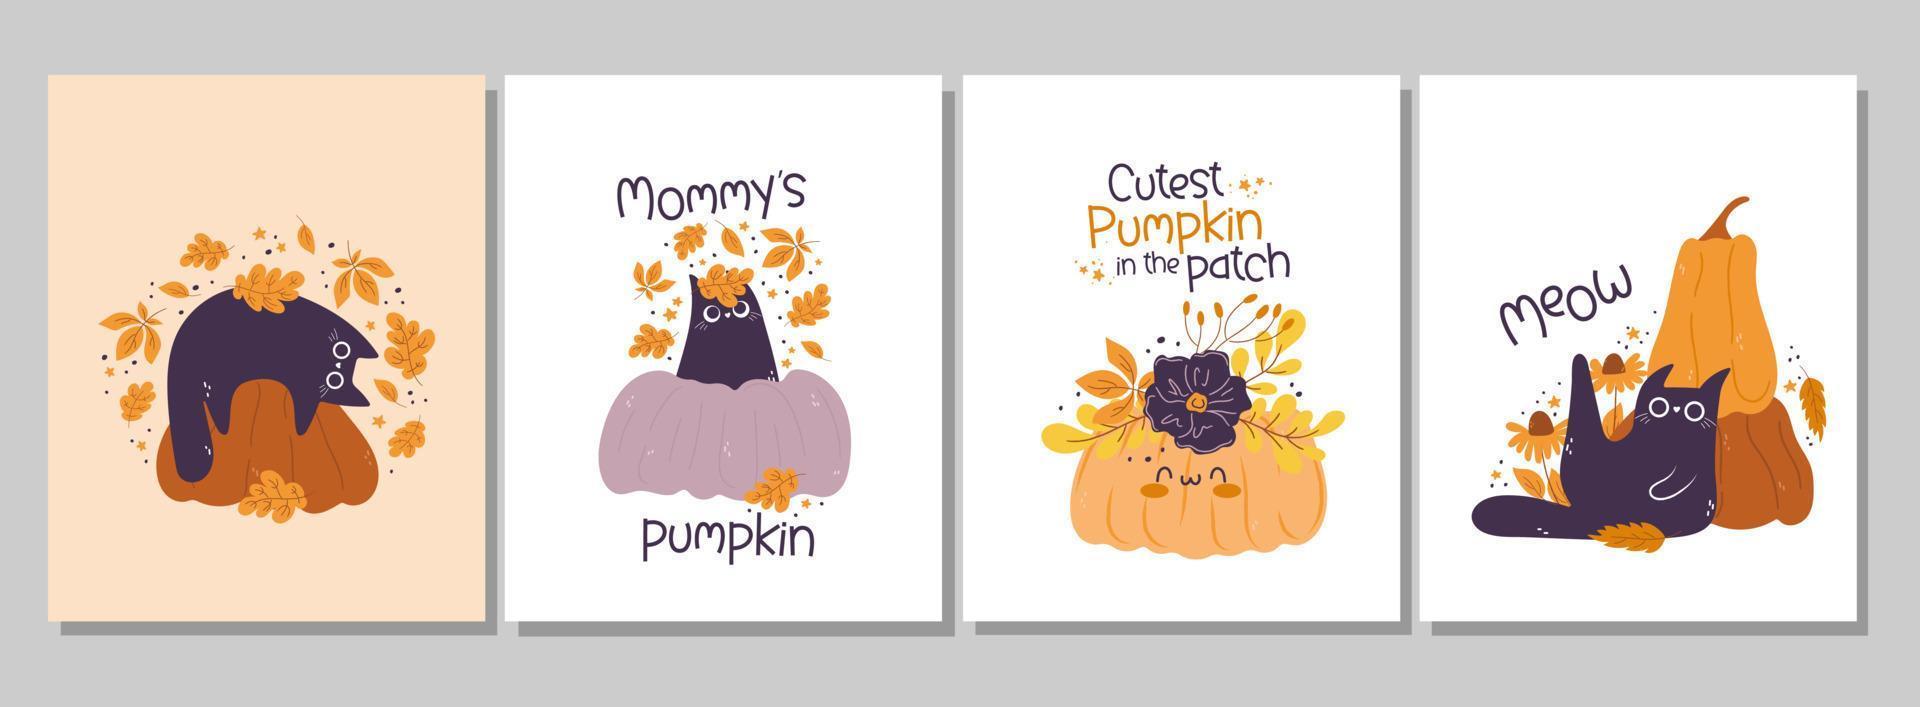 Decorating a child's room. Cute black cat and pumpkins. Nursery wall arts. Kawaii Pumpkin  autumn characters. Set of vector illustrations perfect for cards, invitations, posters.